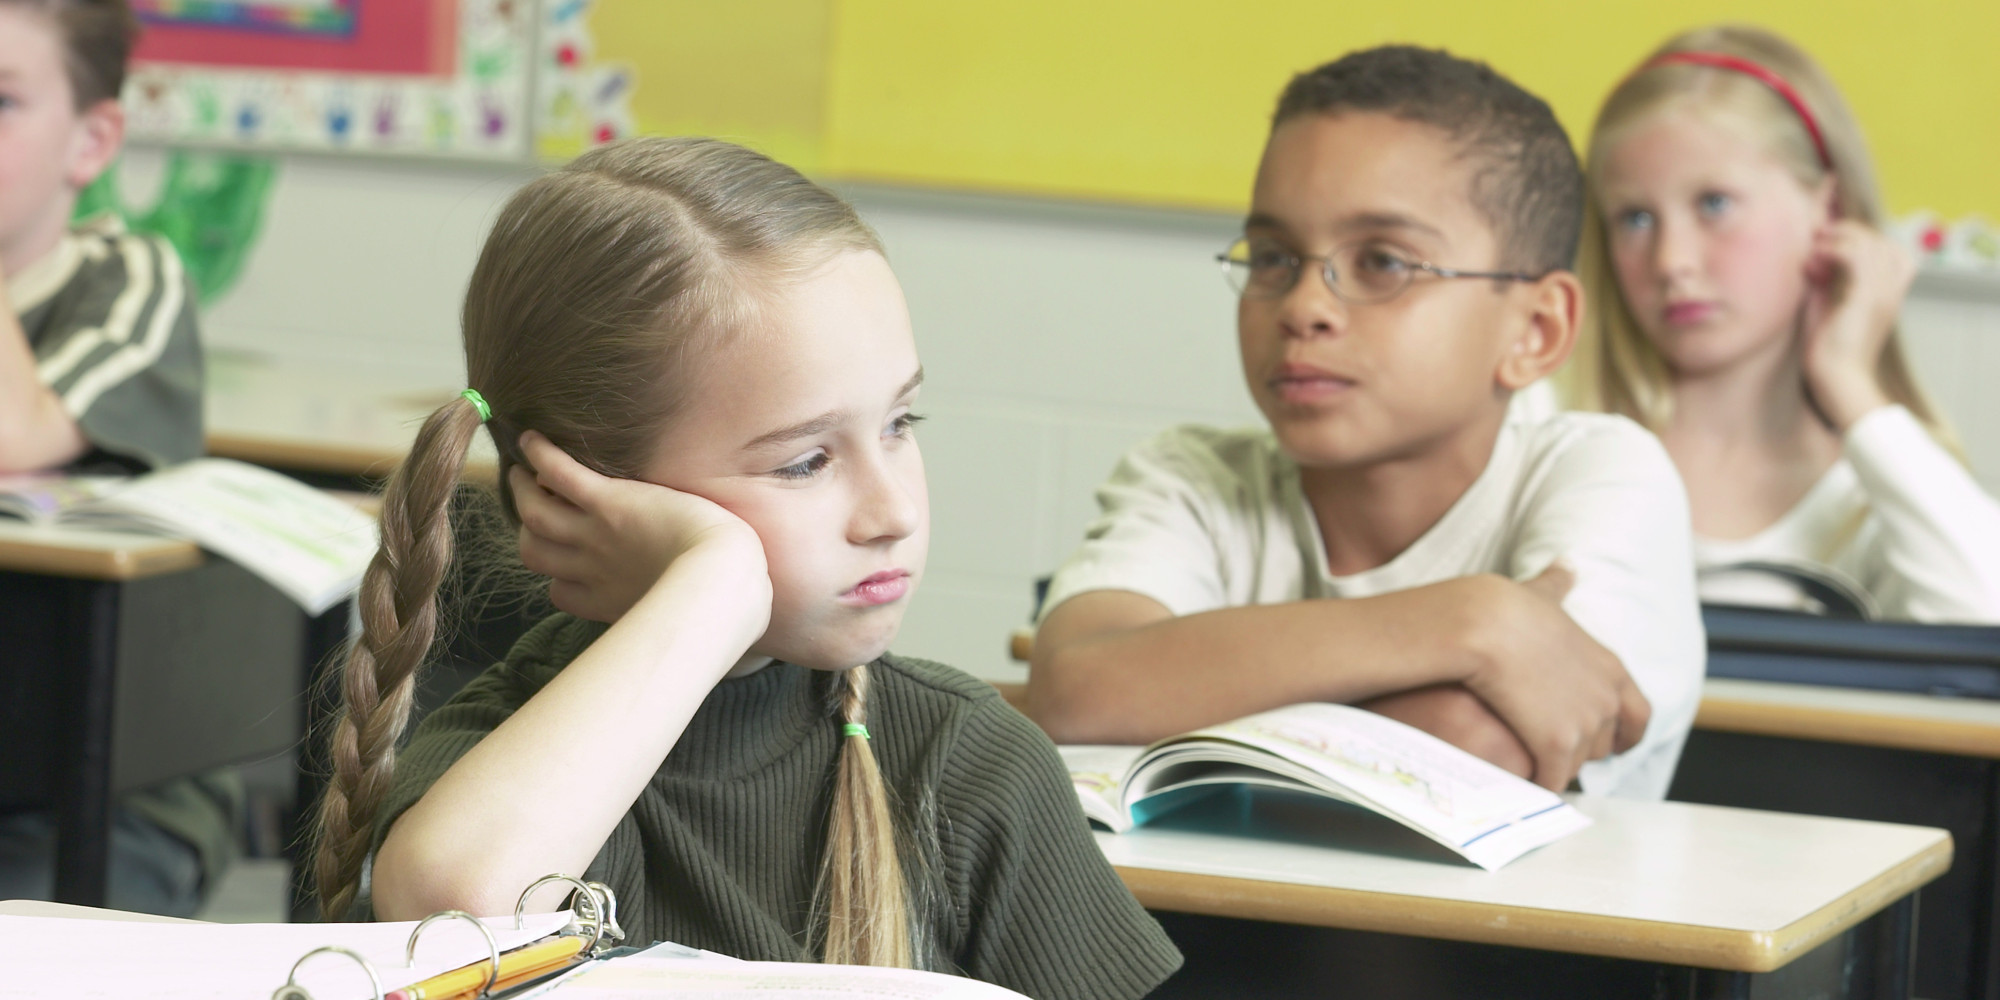 Why Schools Should Pay More Attention To Students' Grit And Self-Control